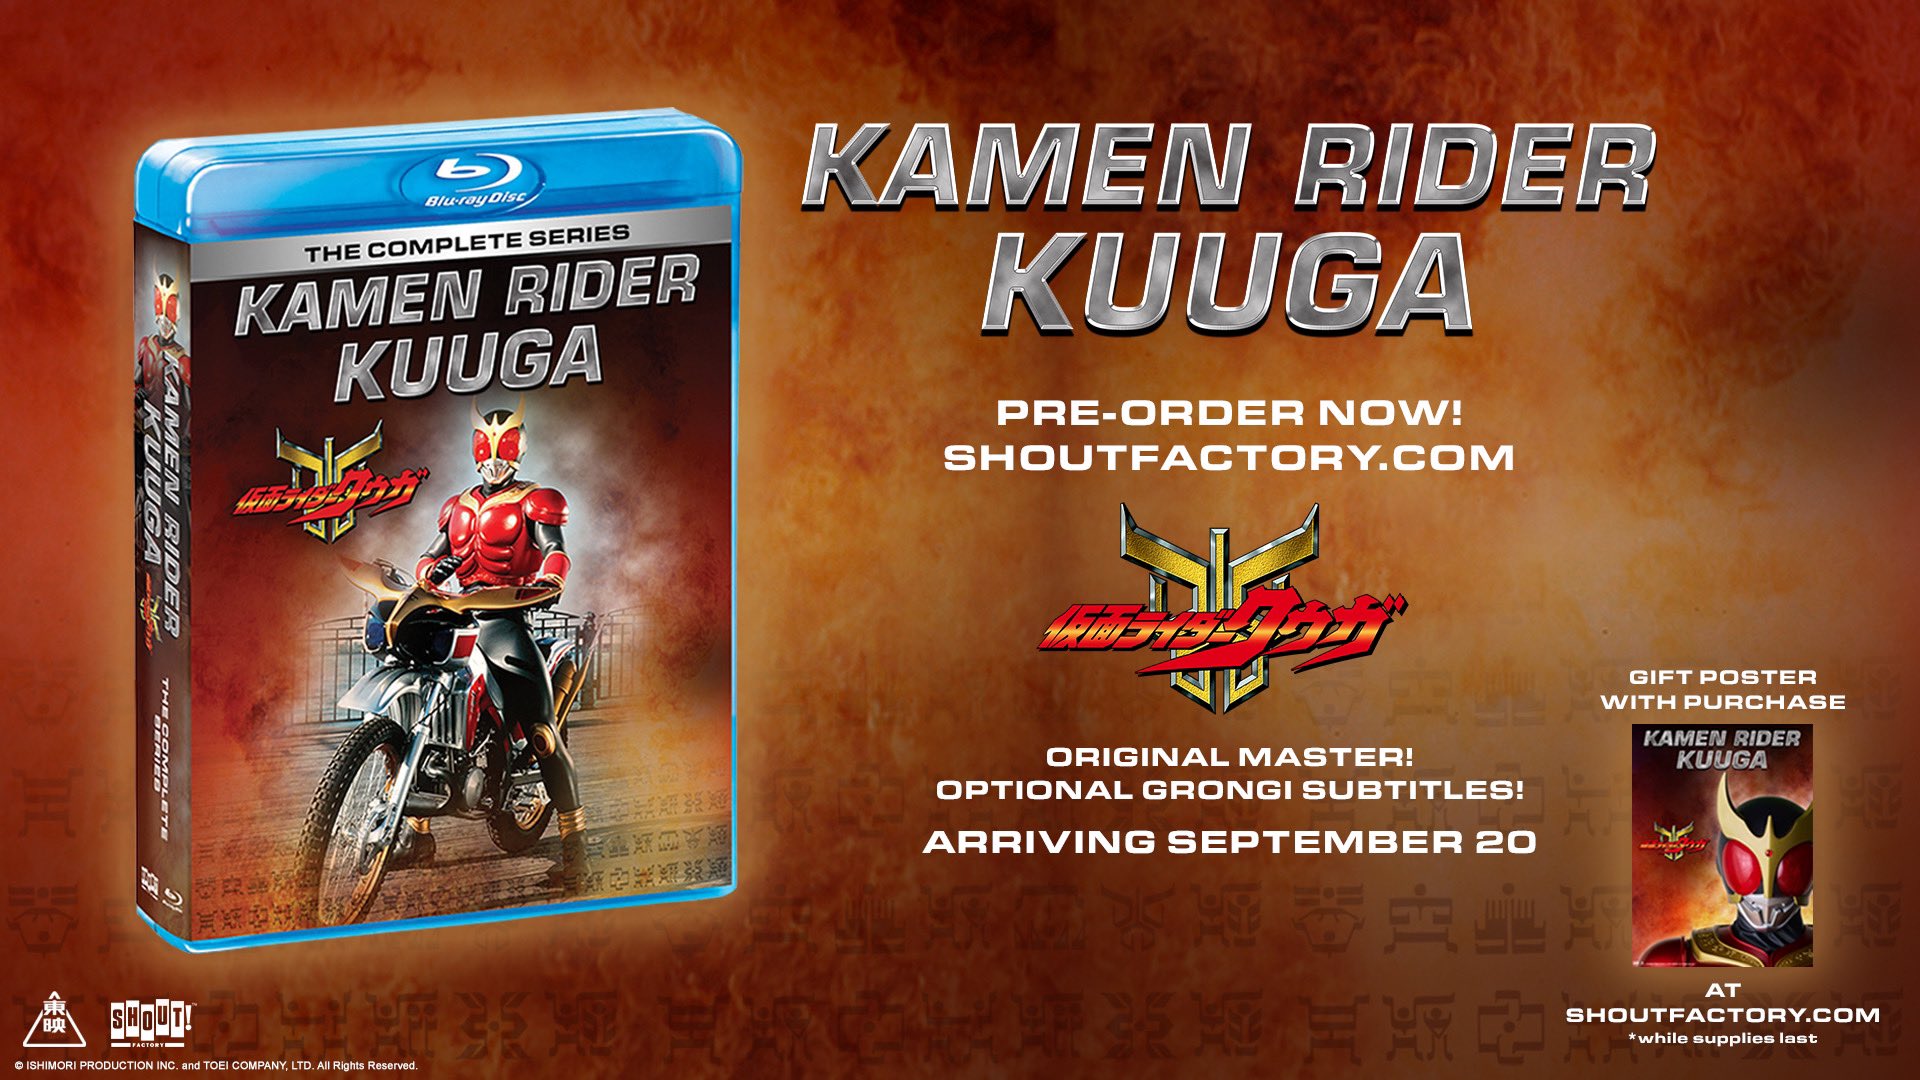 A promotional image for the Shout! Factory Blu-ray release of Kamen Rider Kuuga featuring a view of the finished product with the titular Kuuga rider his motorcycle.